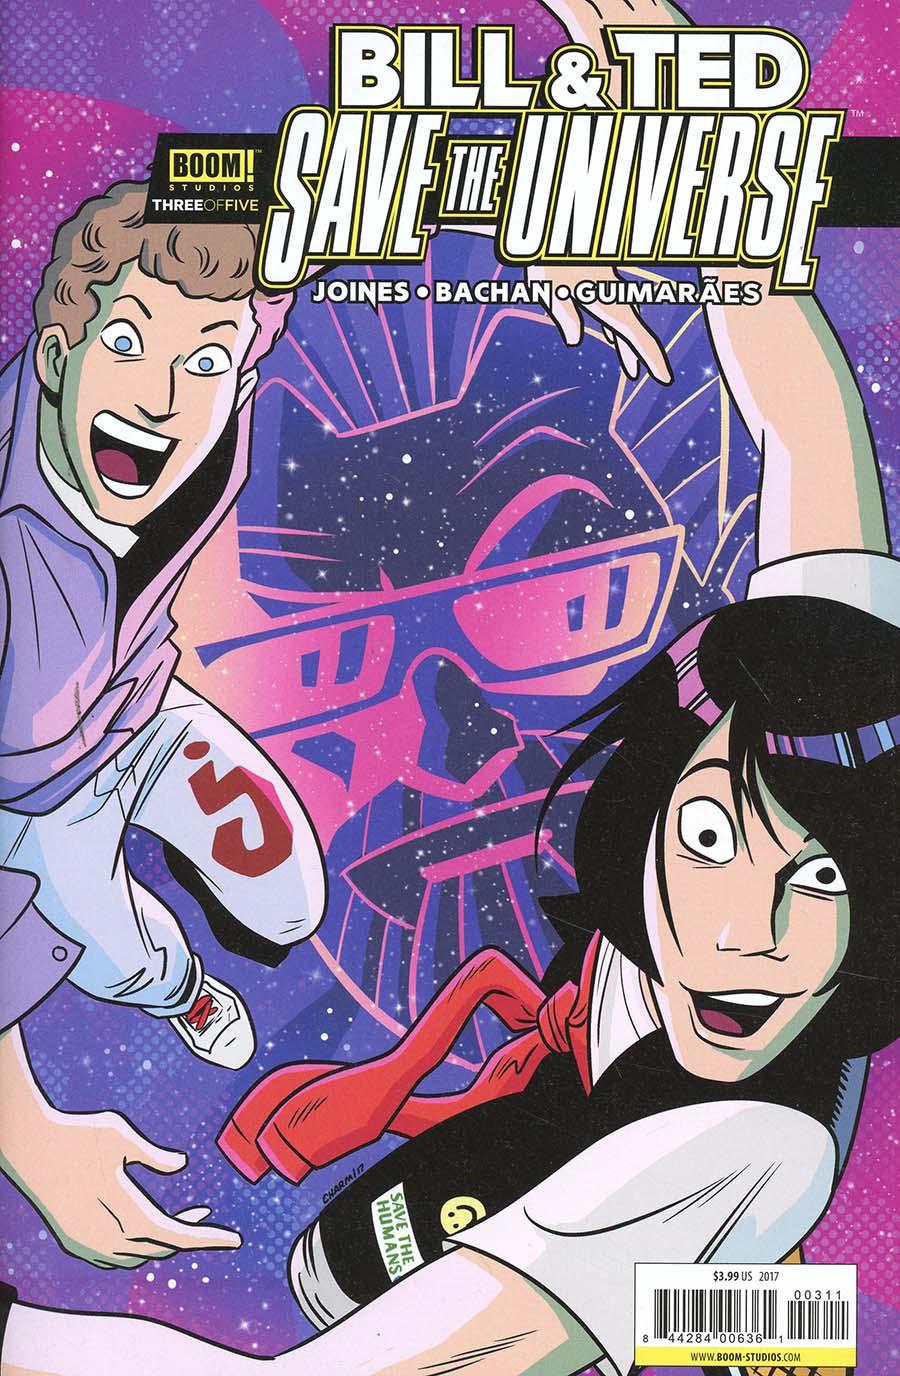 Bill & Ted Save The Universe Vol. 1 #3